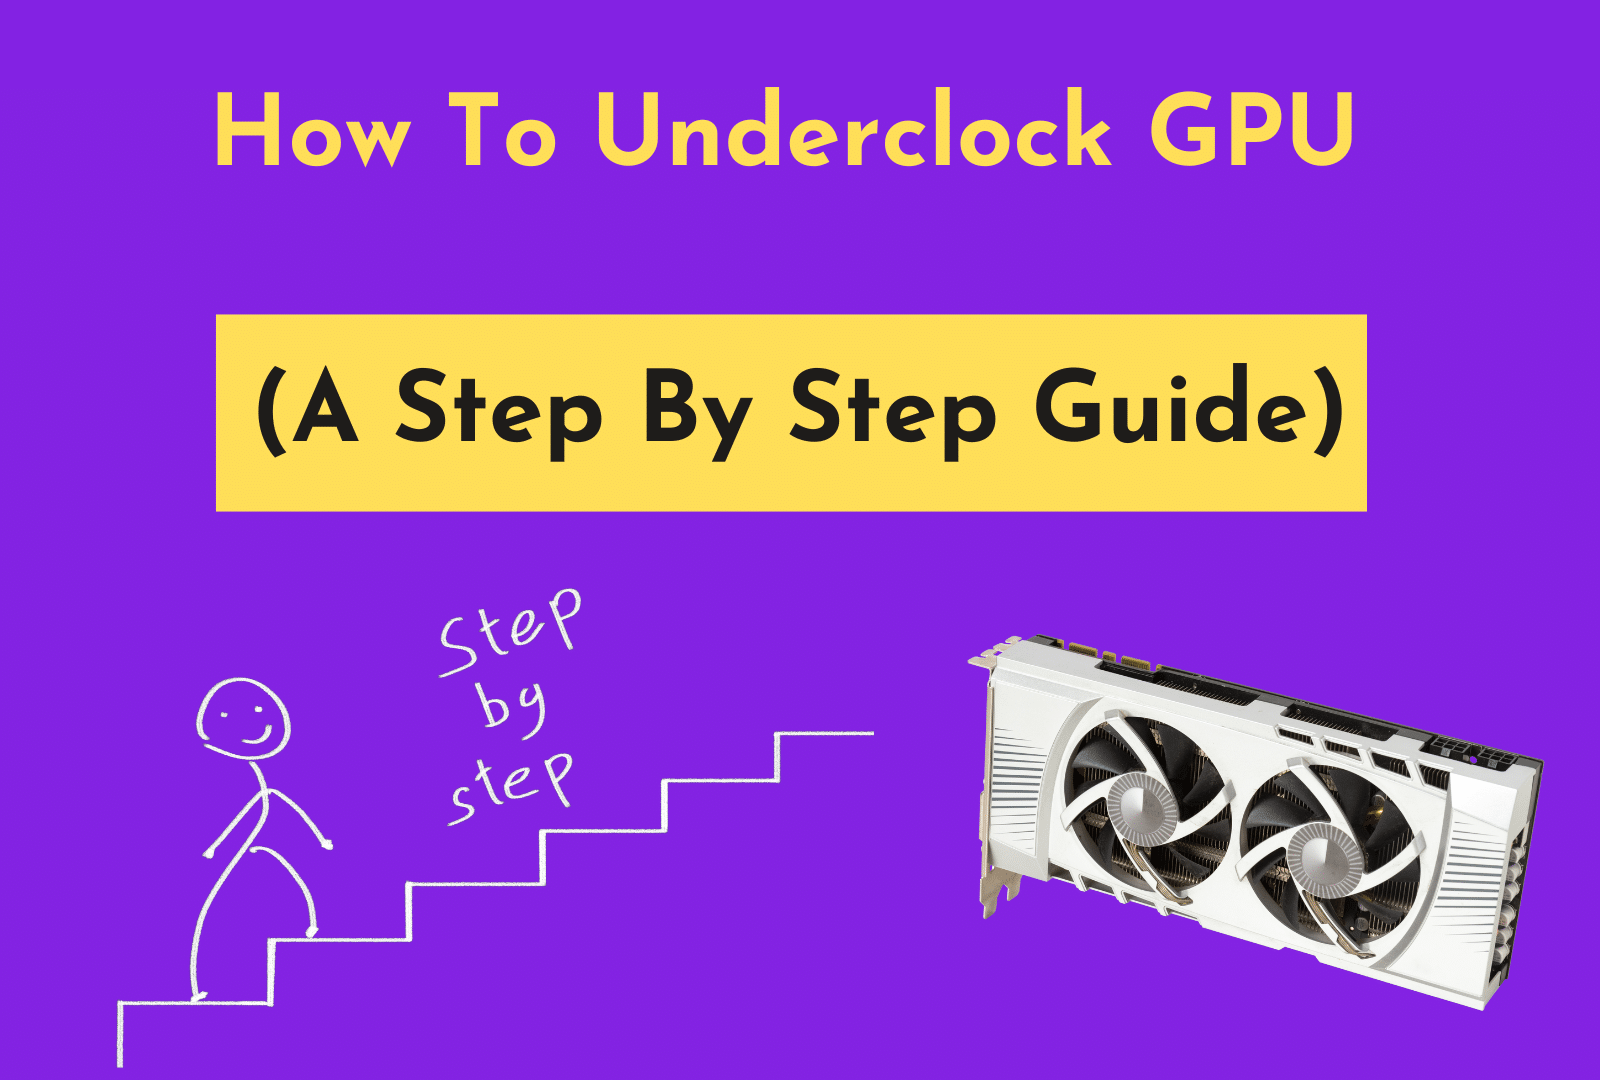 C:\Users\Mohsin\Downloads\How To Underclock GPU (2).png